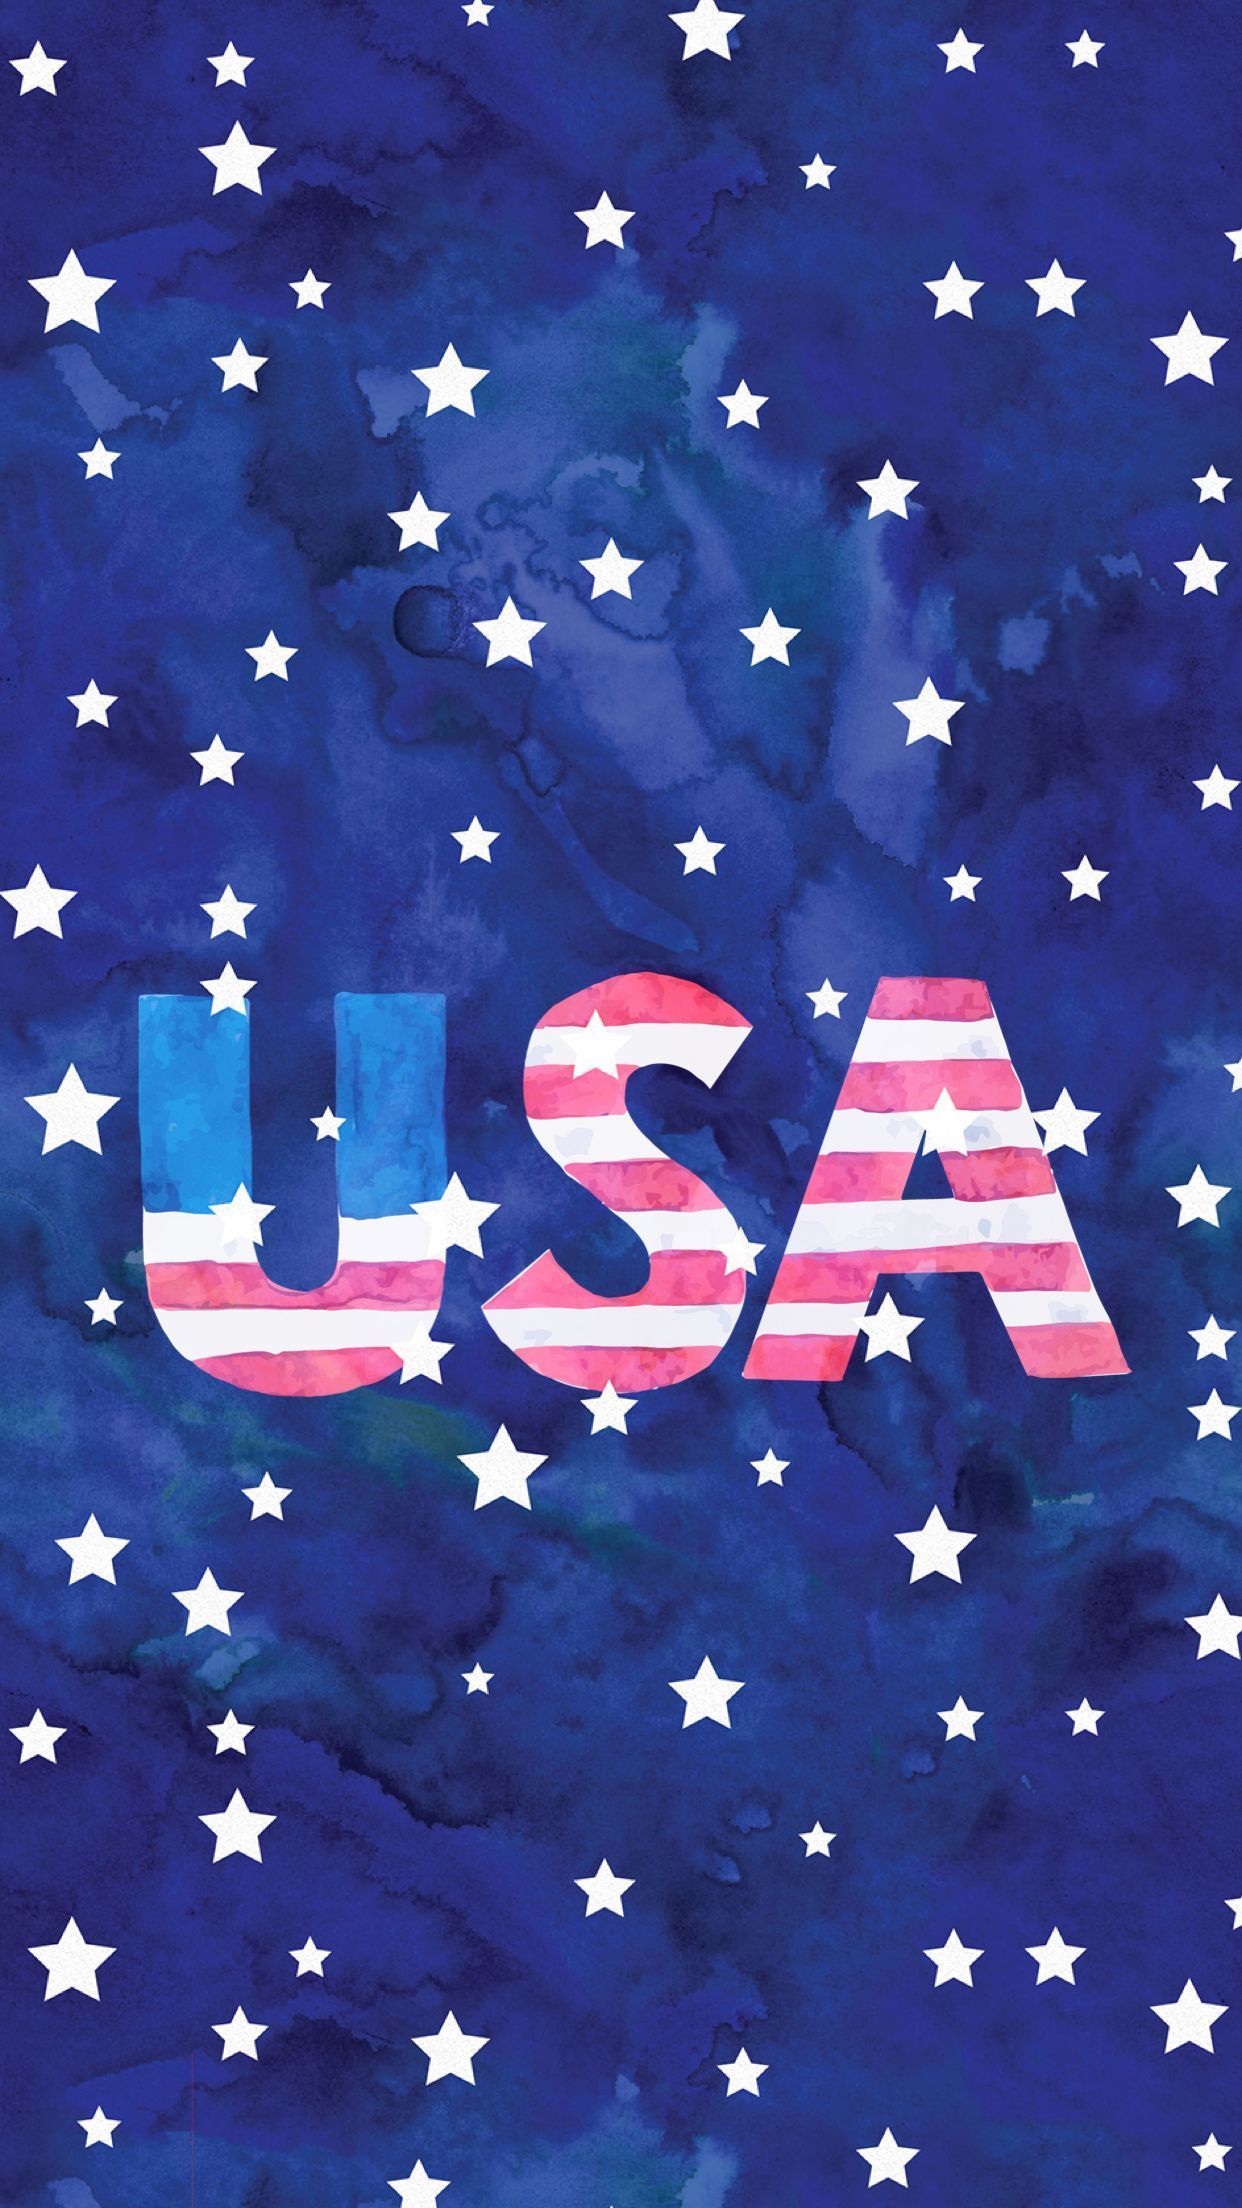 USA iPhone Wallpaper with high-resolution 1080x1920 pixel. You can use this wallpaper for your iPhone 5, 6, 7, 8, X, XS, XR backgrounds, Mobile Screensaver, or iPad Lock Screen - July